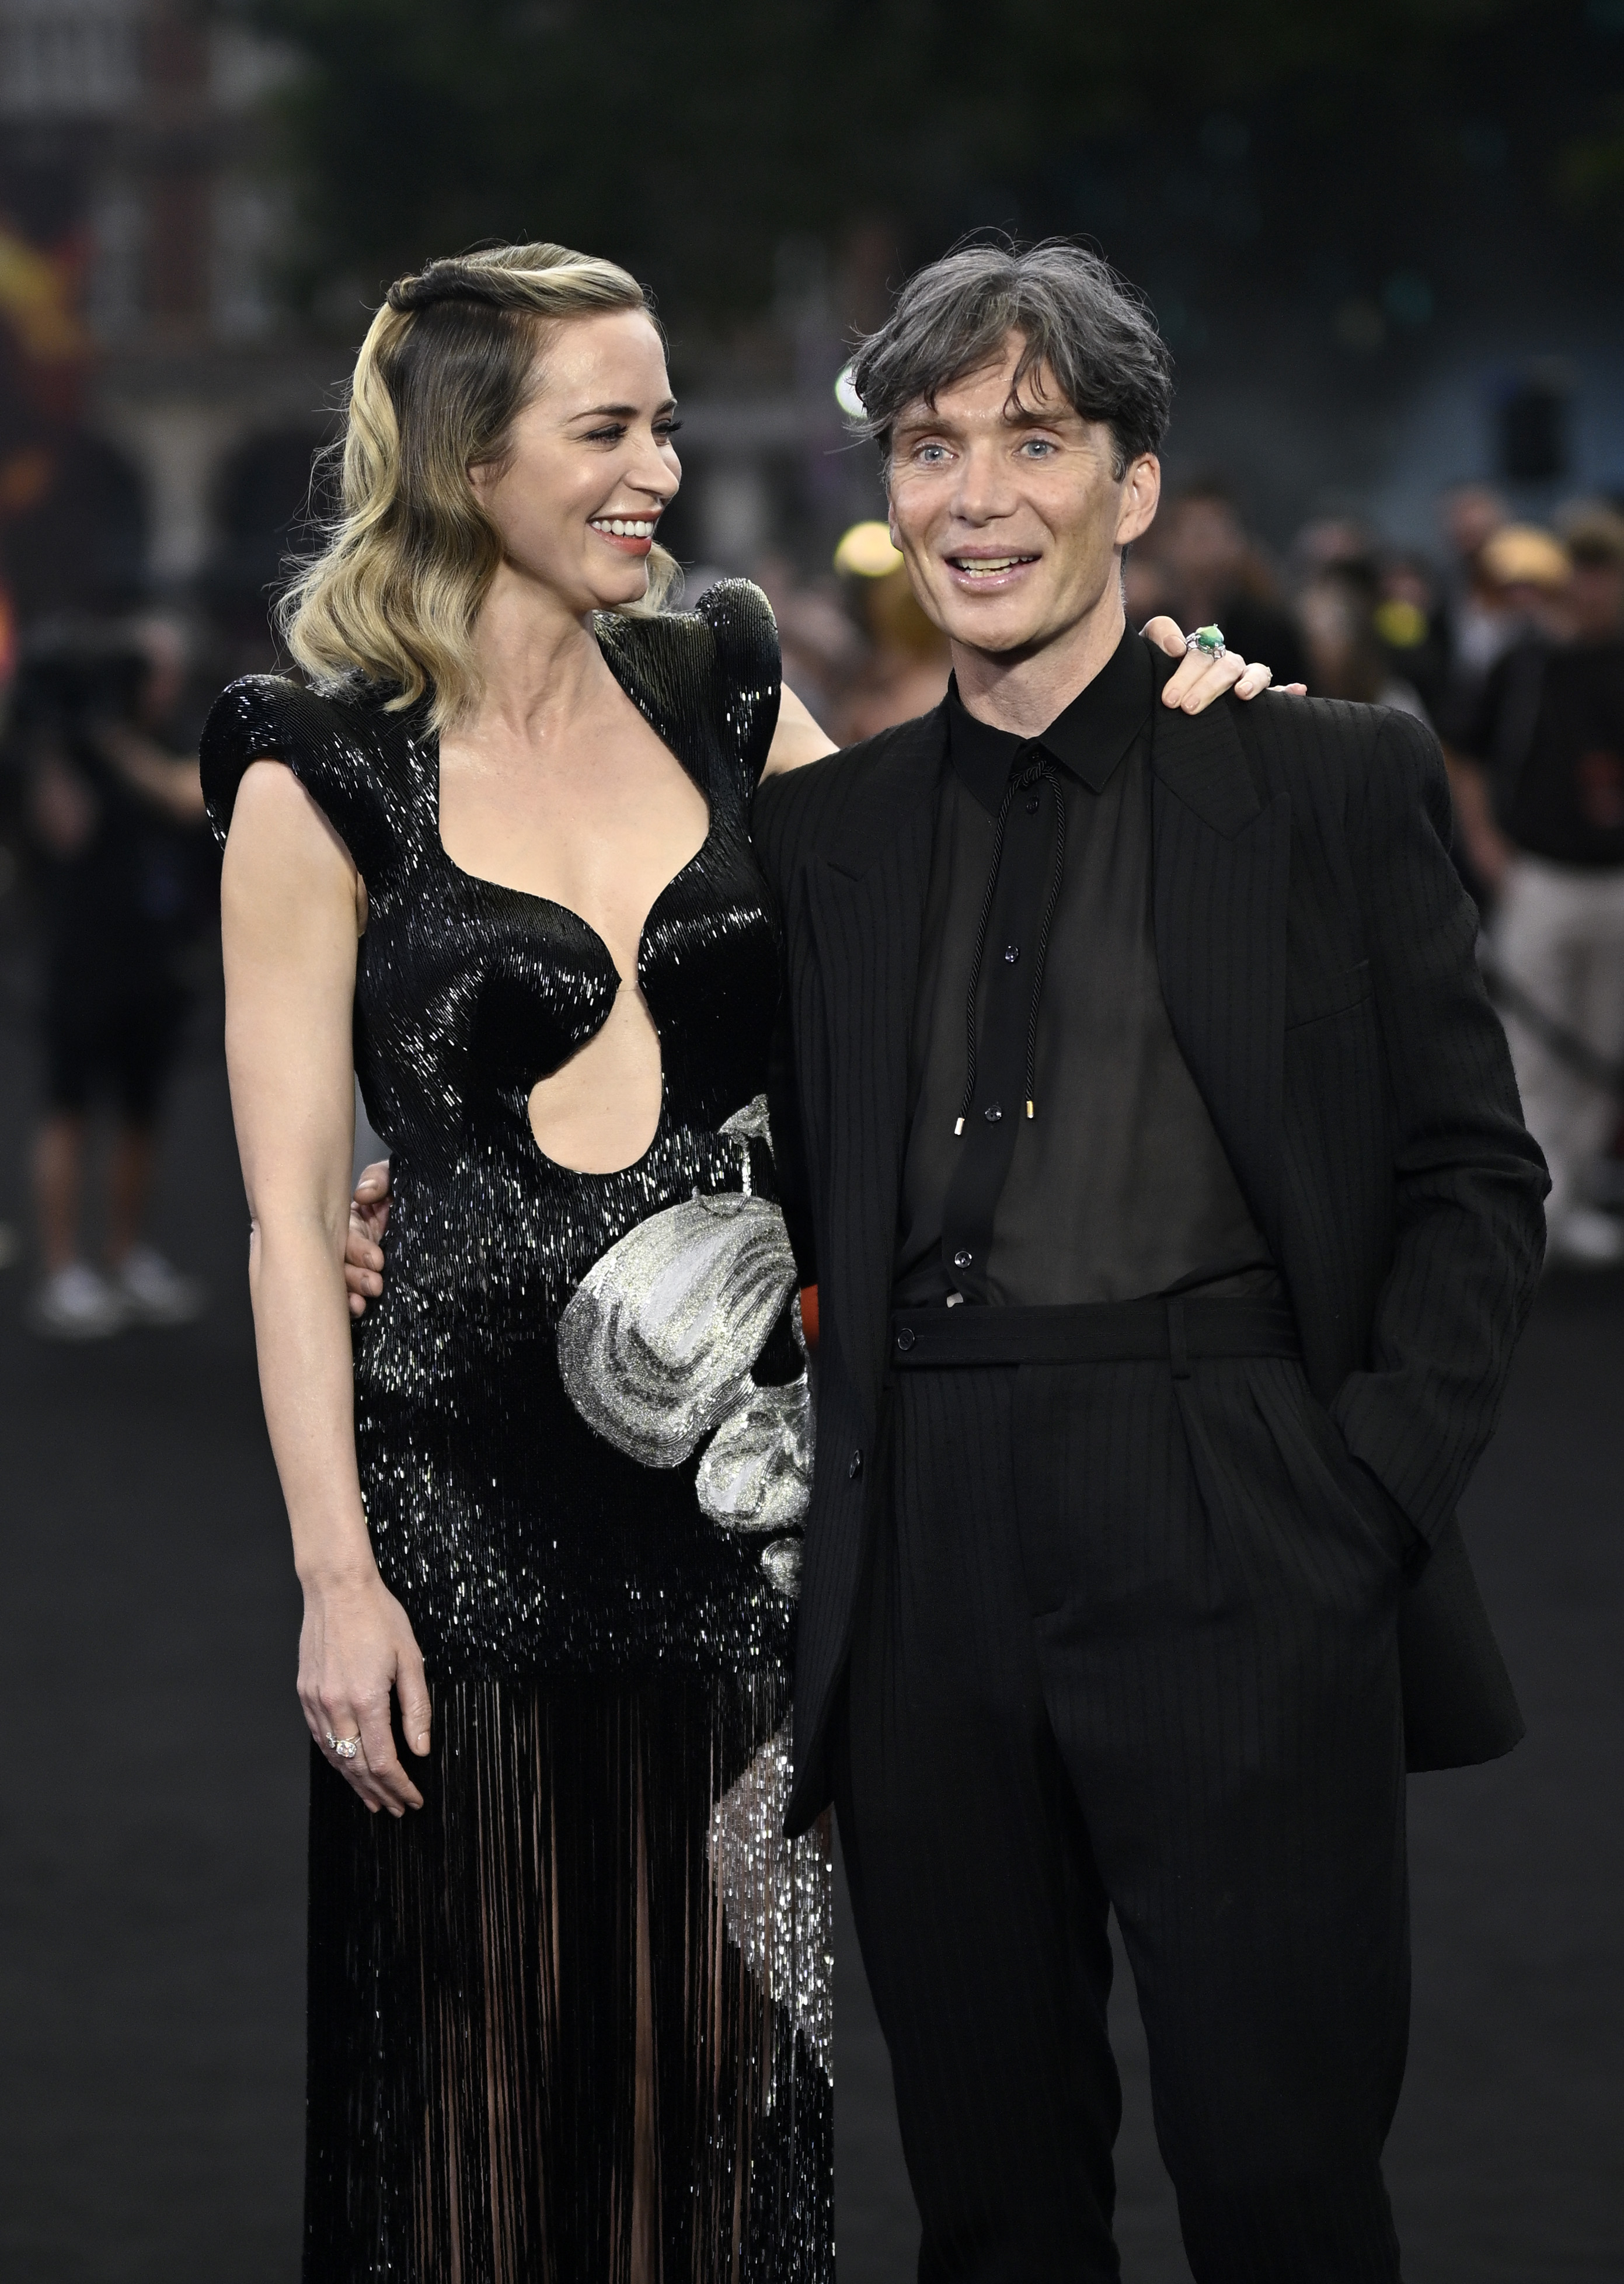 Emily and Cillian, who play husband and wife in Oppenheimer, smile at the premiere